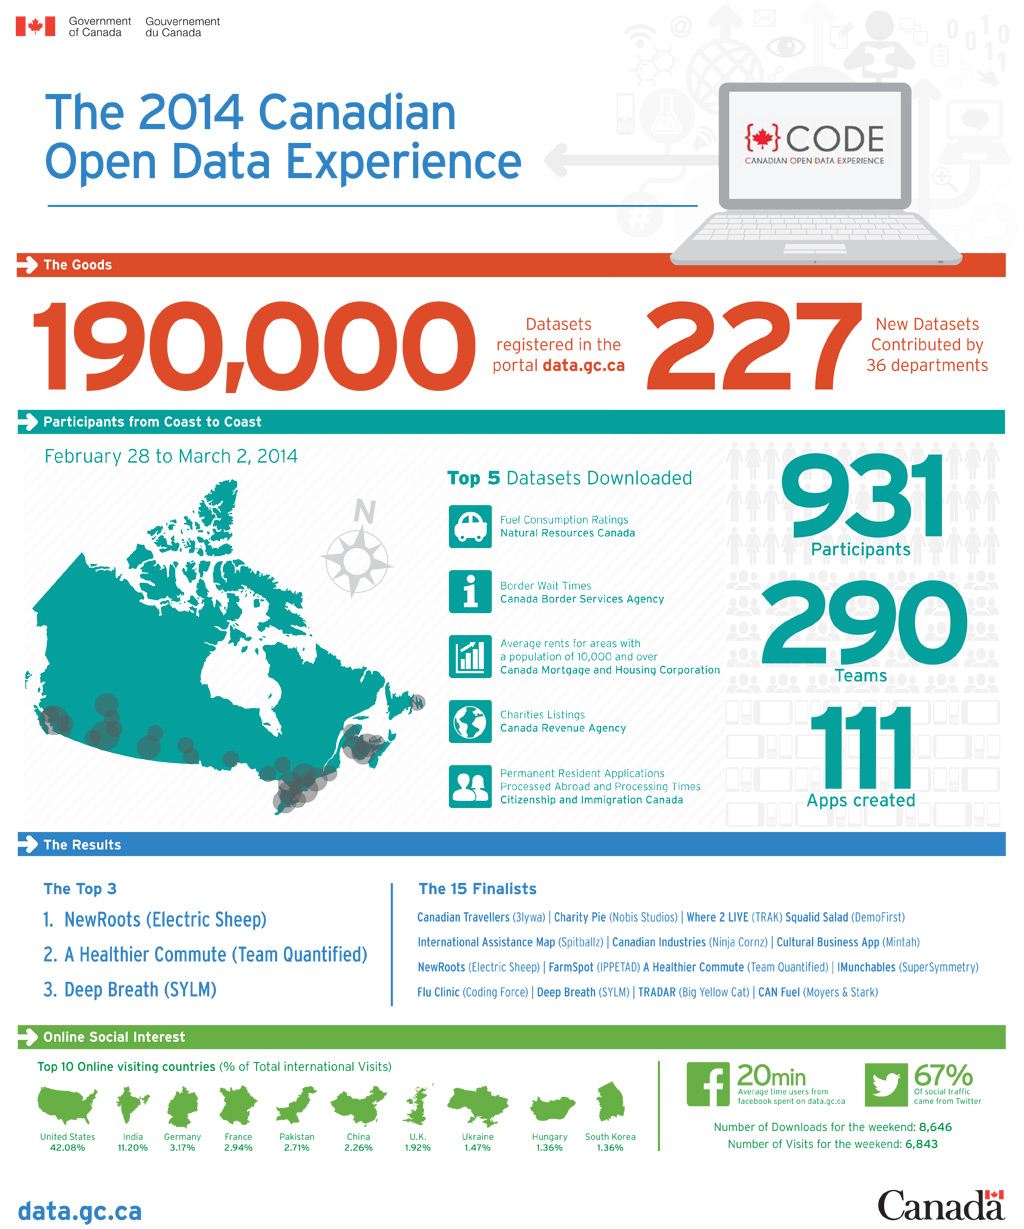 This infographic features some of the highlights of the Canadian Open Data 

Experience hackathon held from February 28th to March 2, 2014.